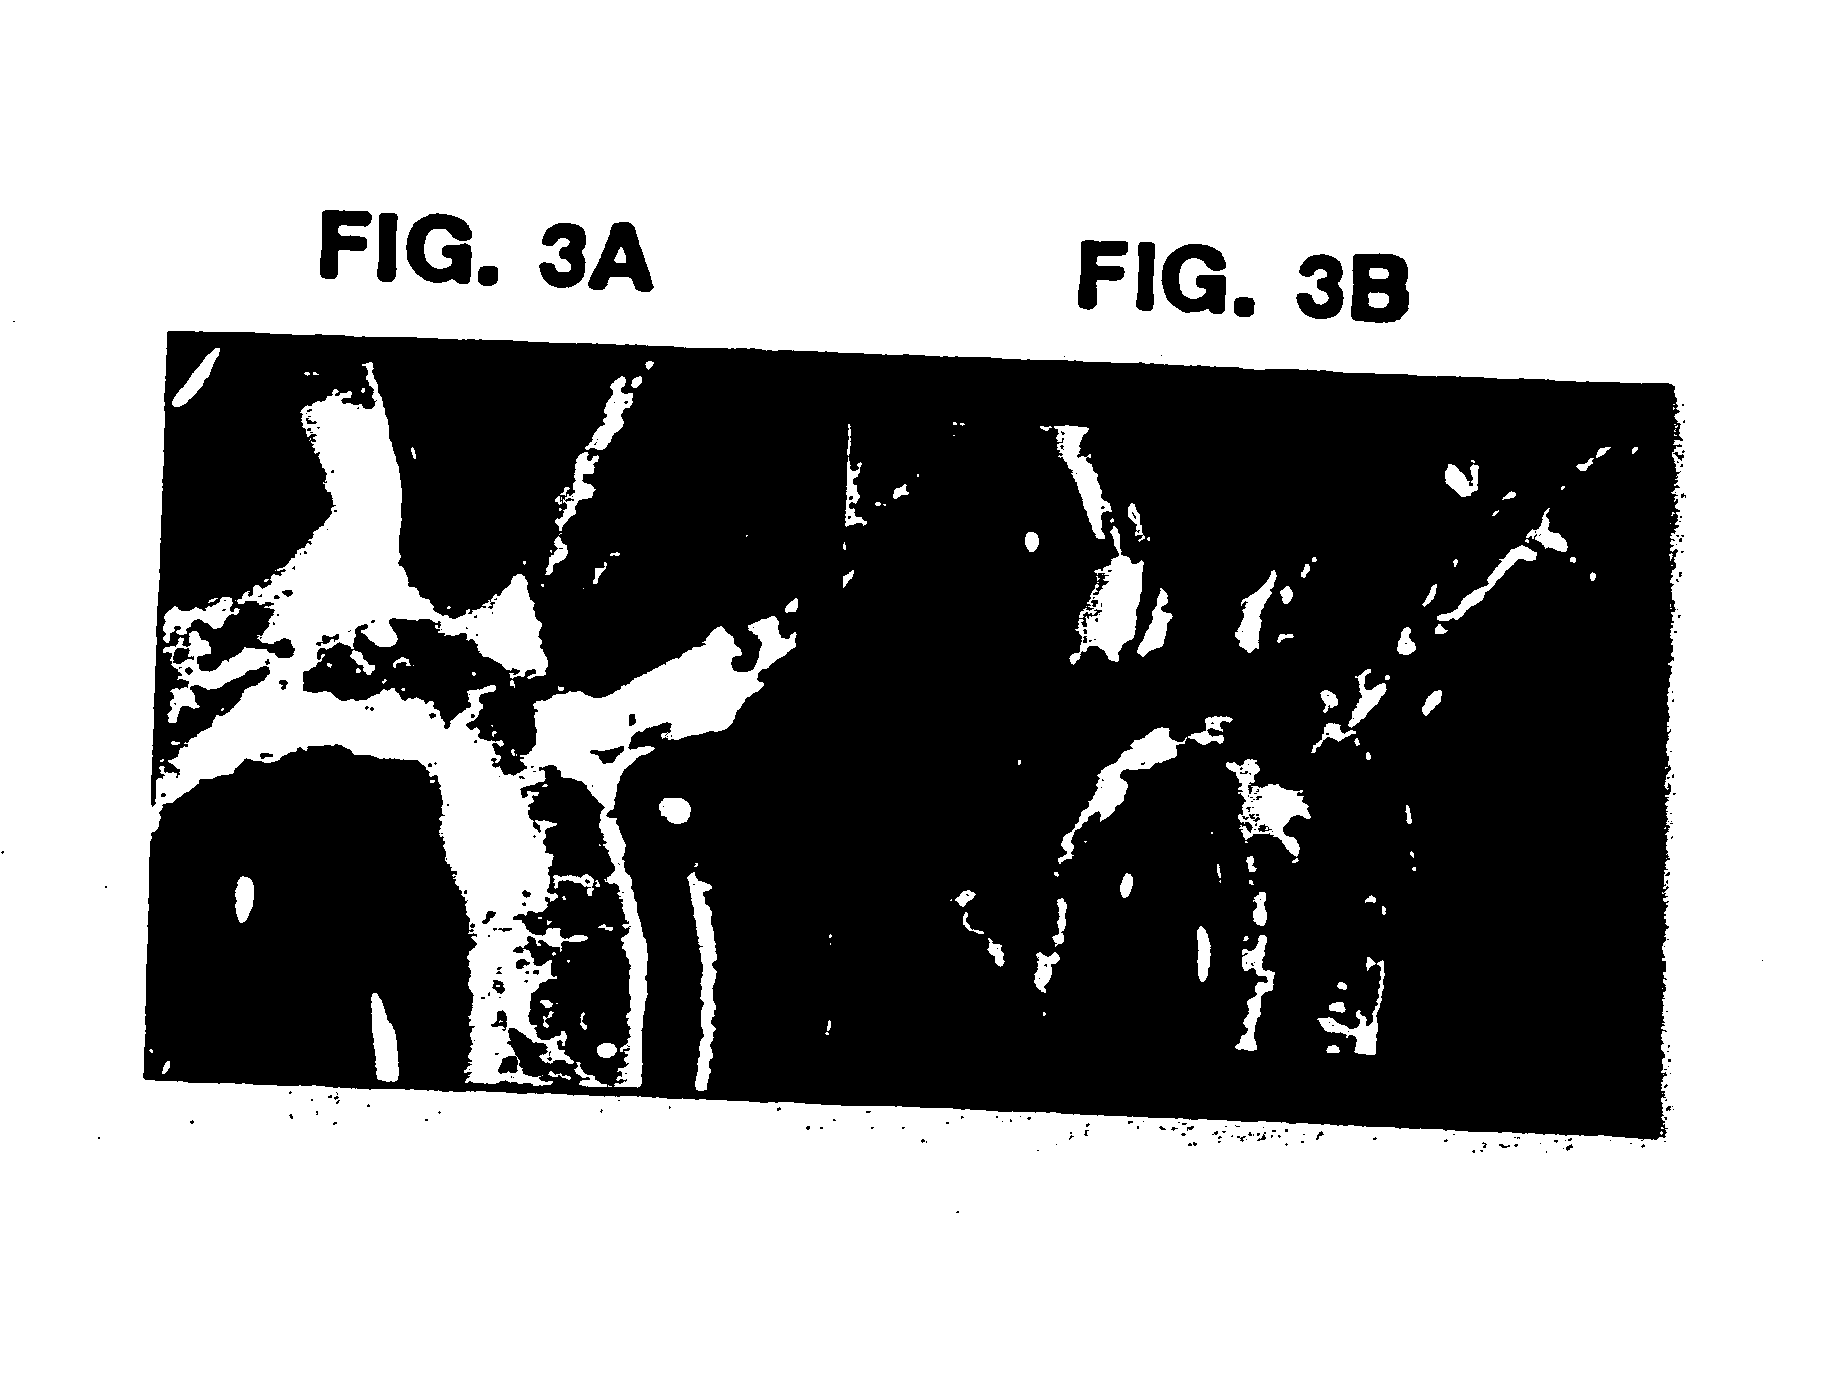 Method to prevent accelerated atherosclerosis using (sRAGE) soluble receptor for advanced glycation endproducts